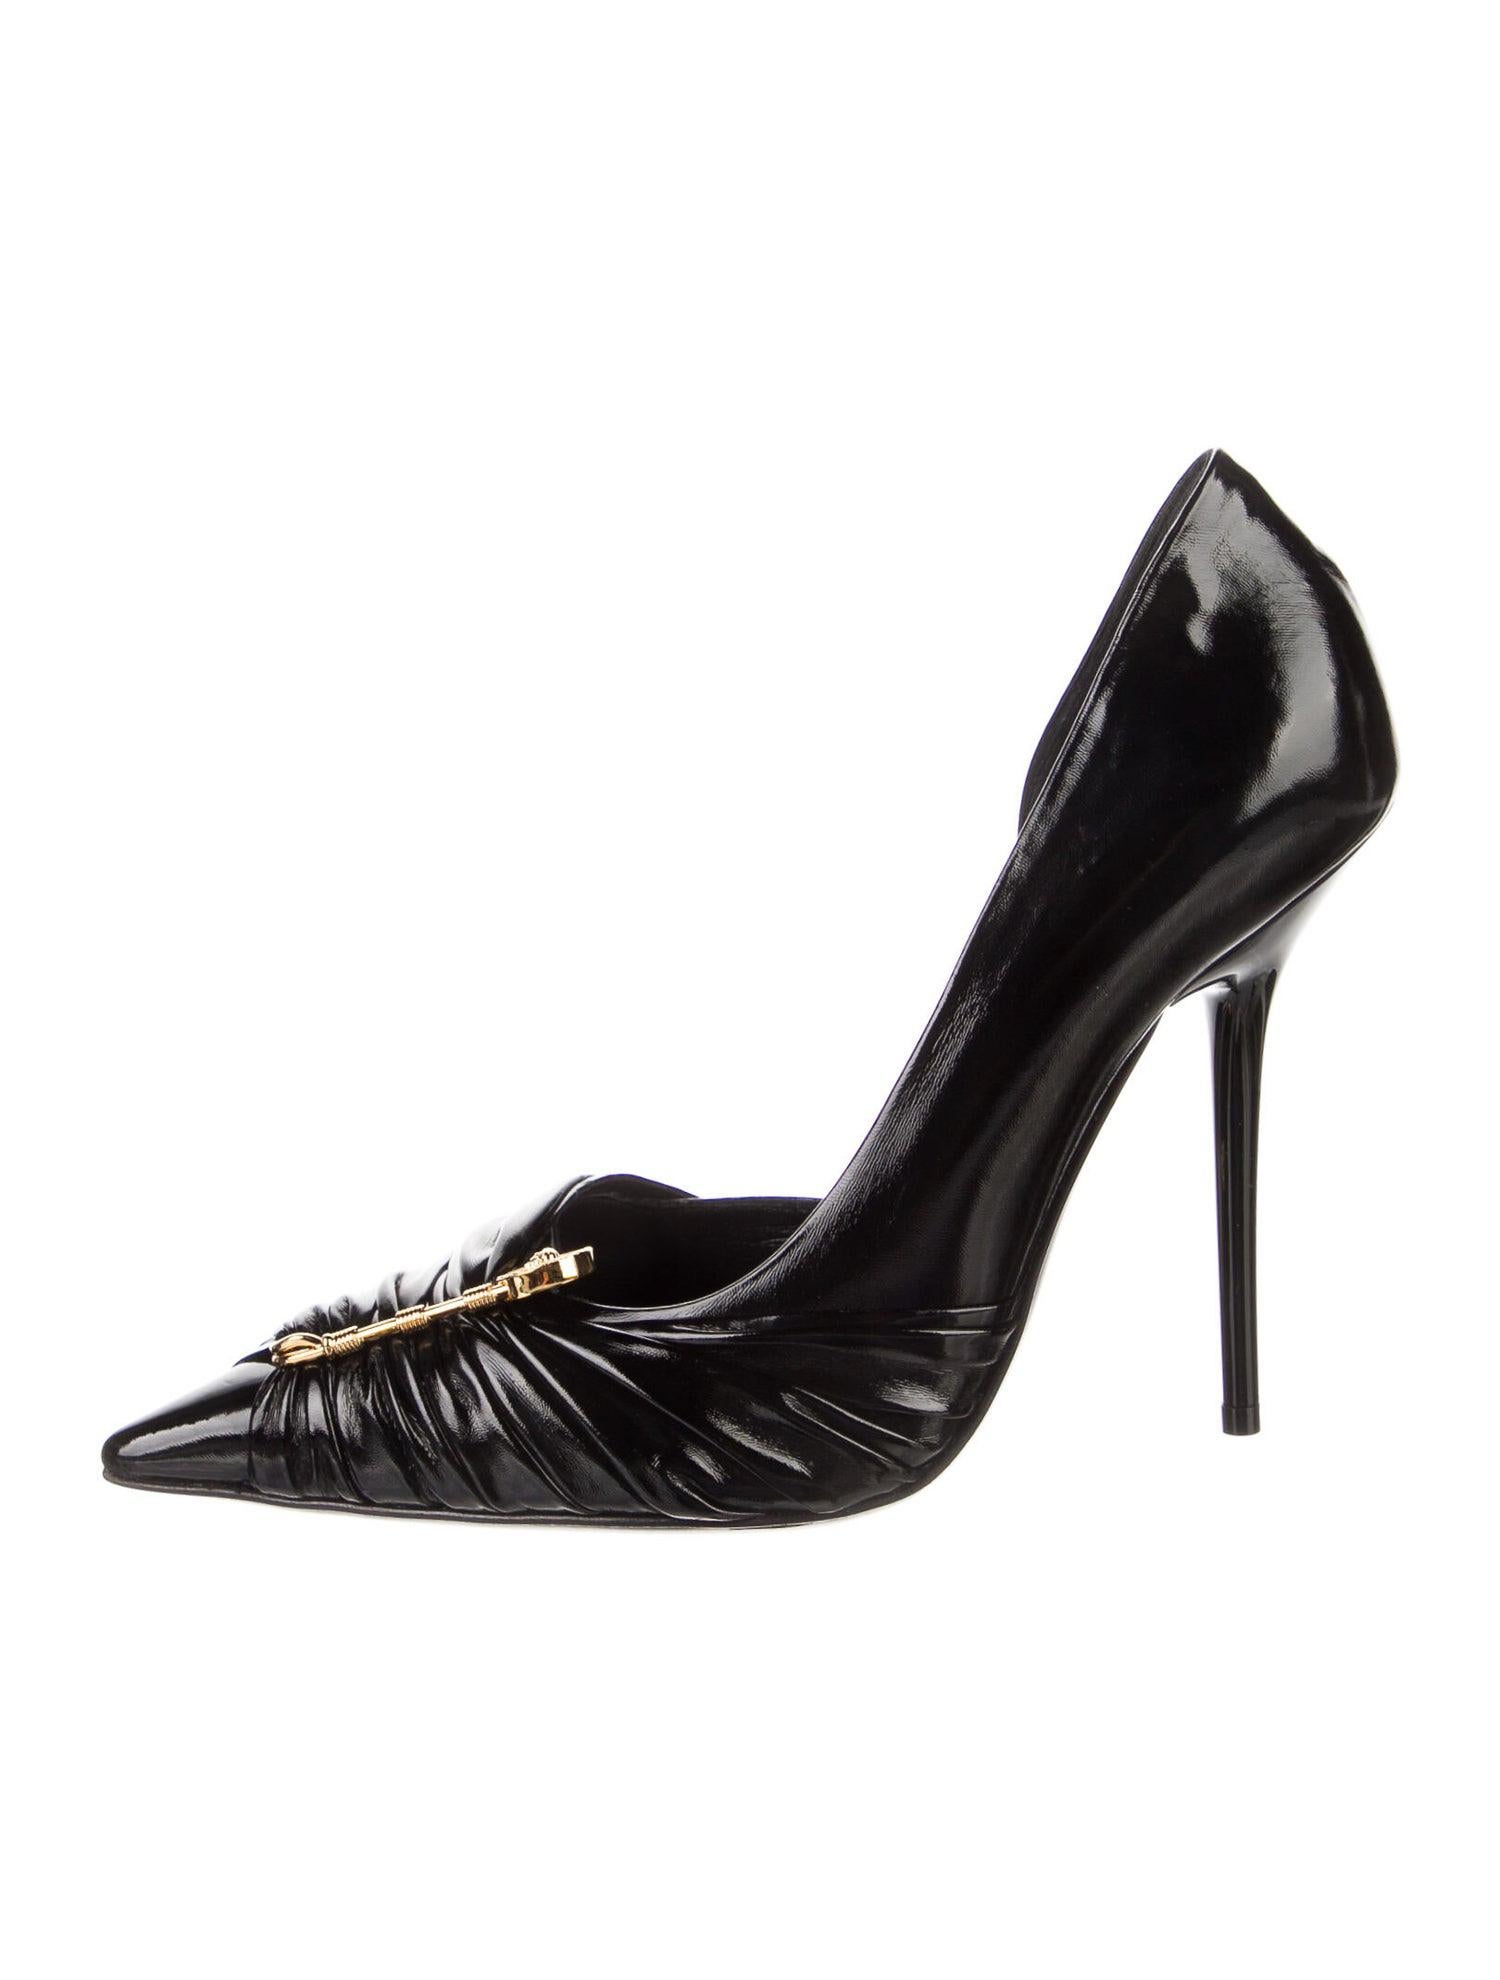 New Versace Black Leather Safety Pin High Heels Shoes Pumps It 41 - US ...